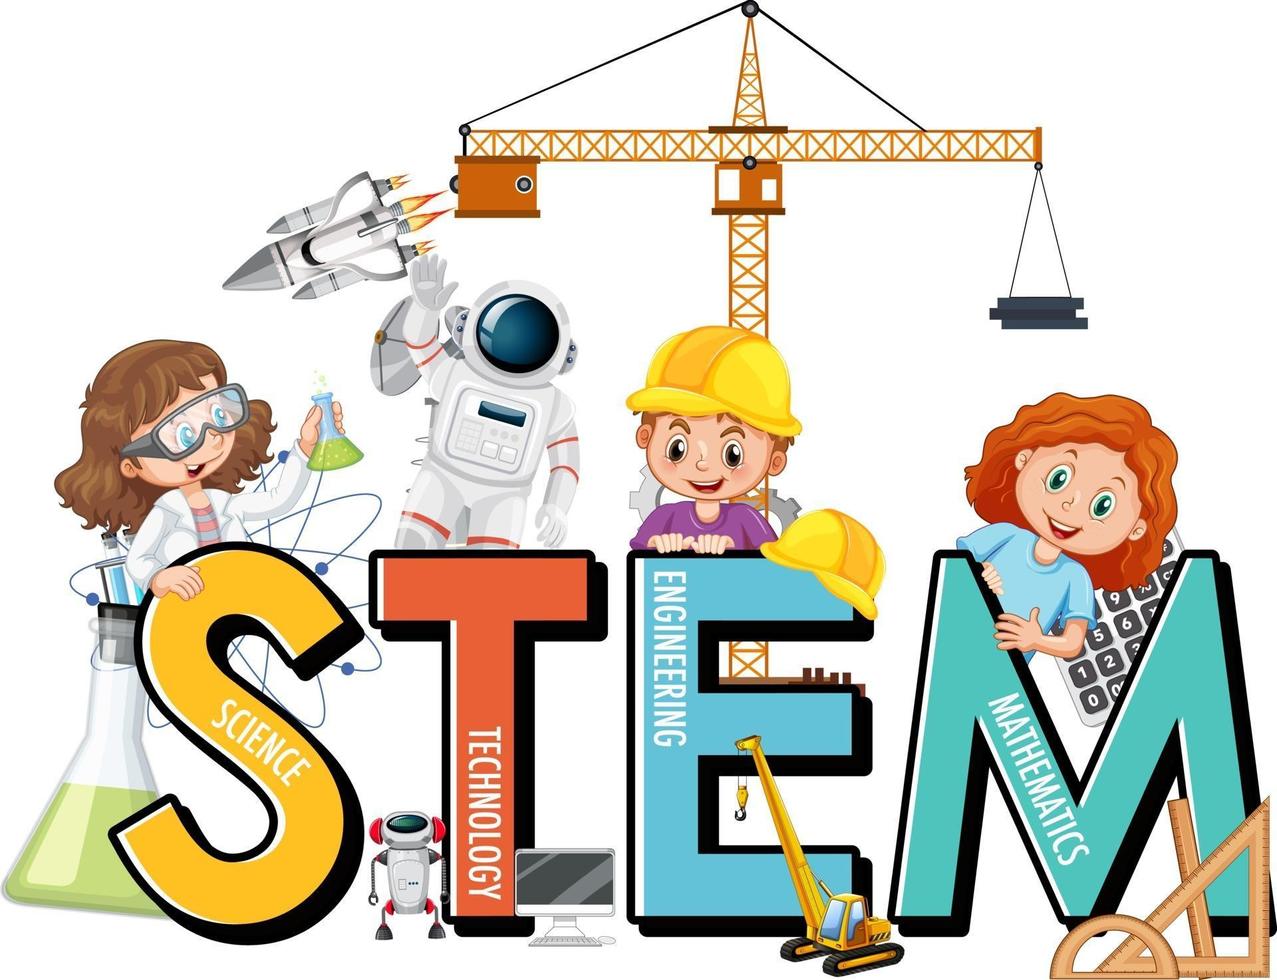 Many kids cartoon character with STEM education font vector